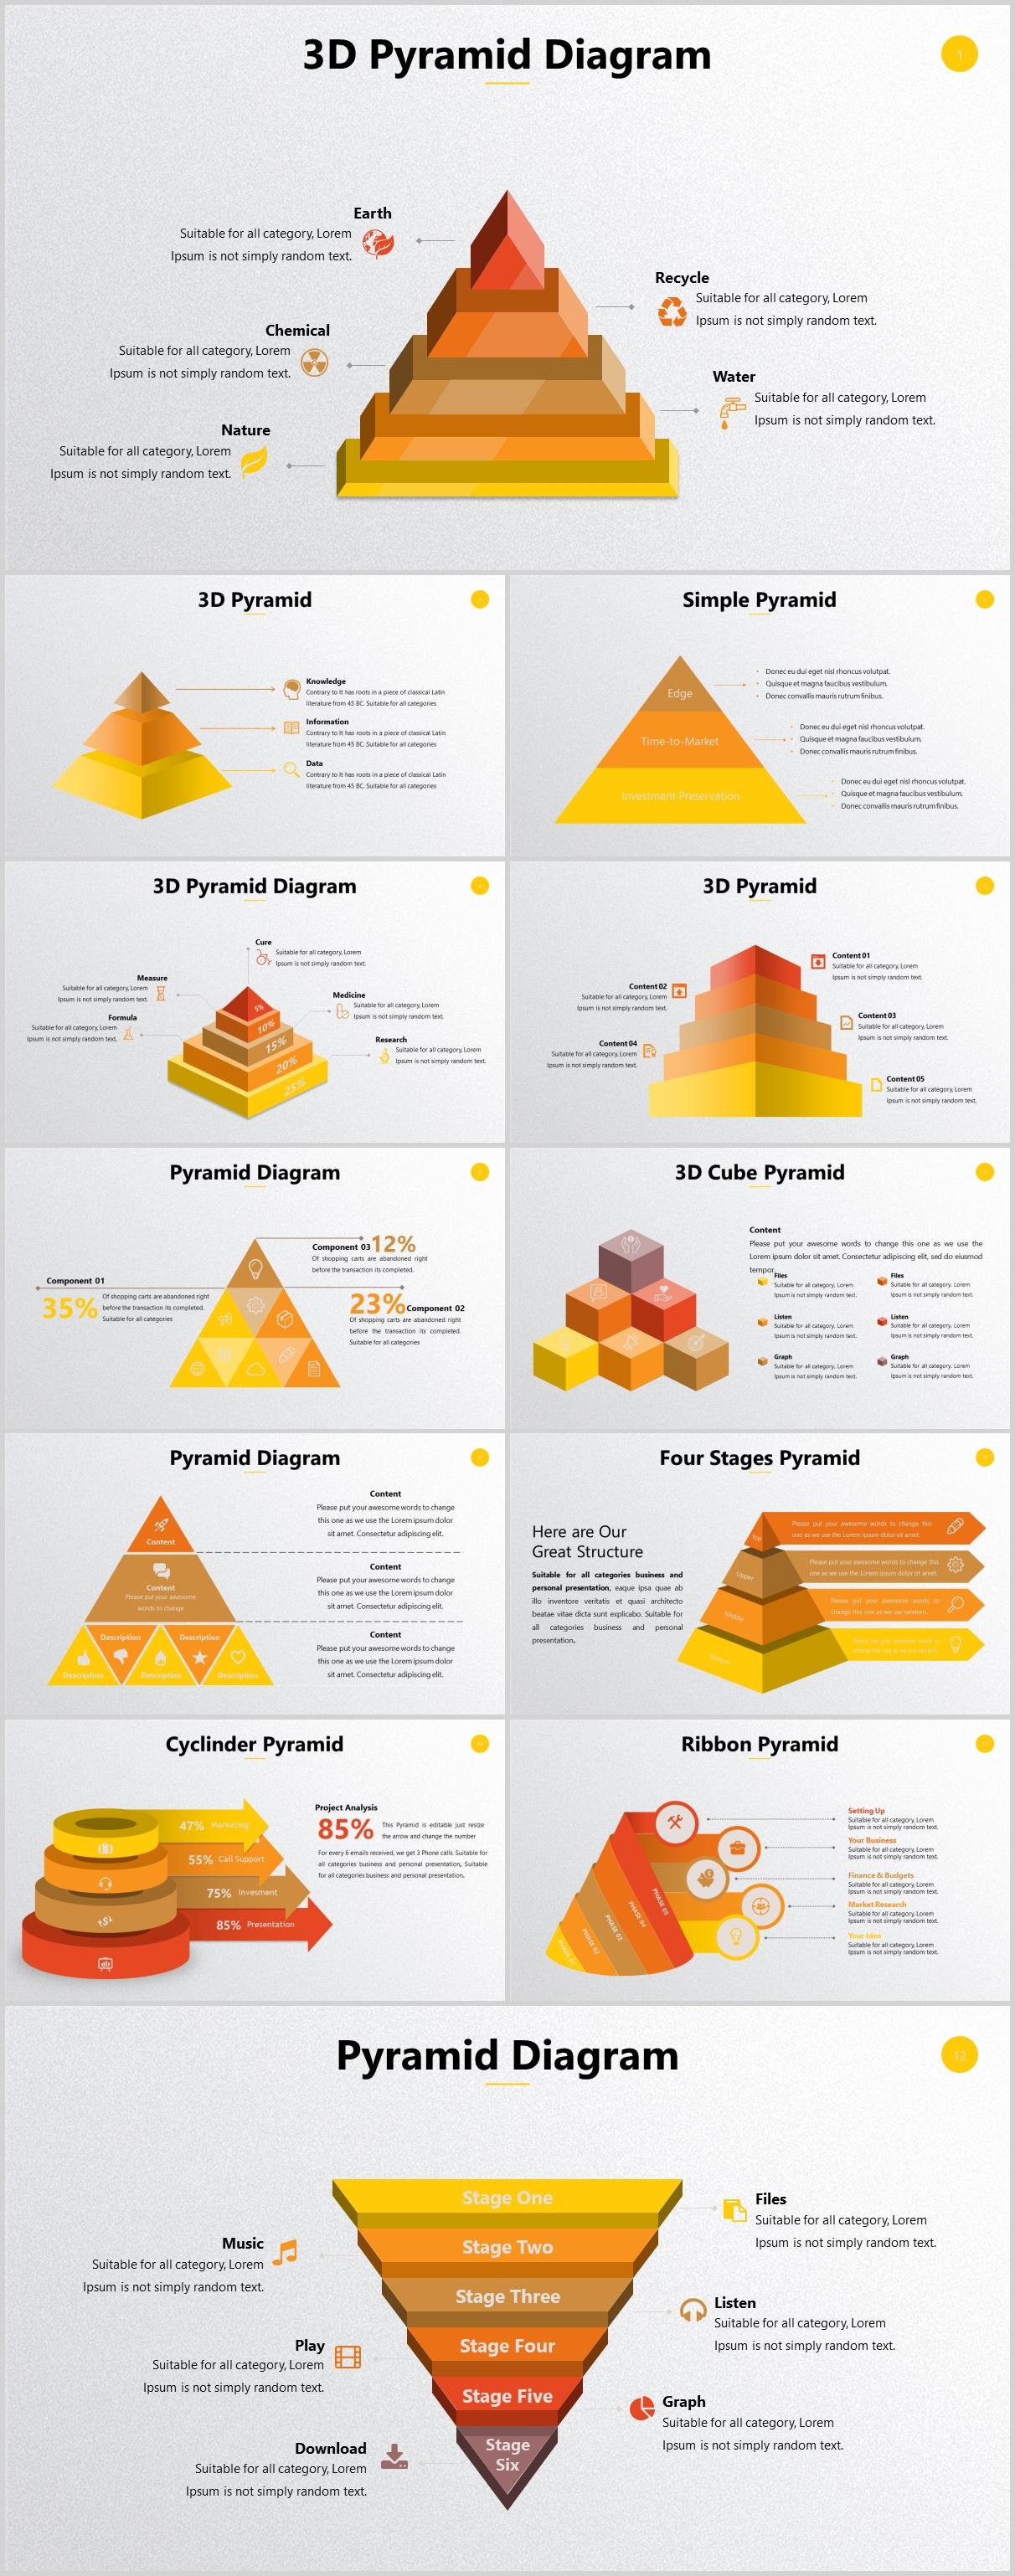 How to make PPT inverted triangle pyramid graphic material using PPT template?